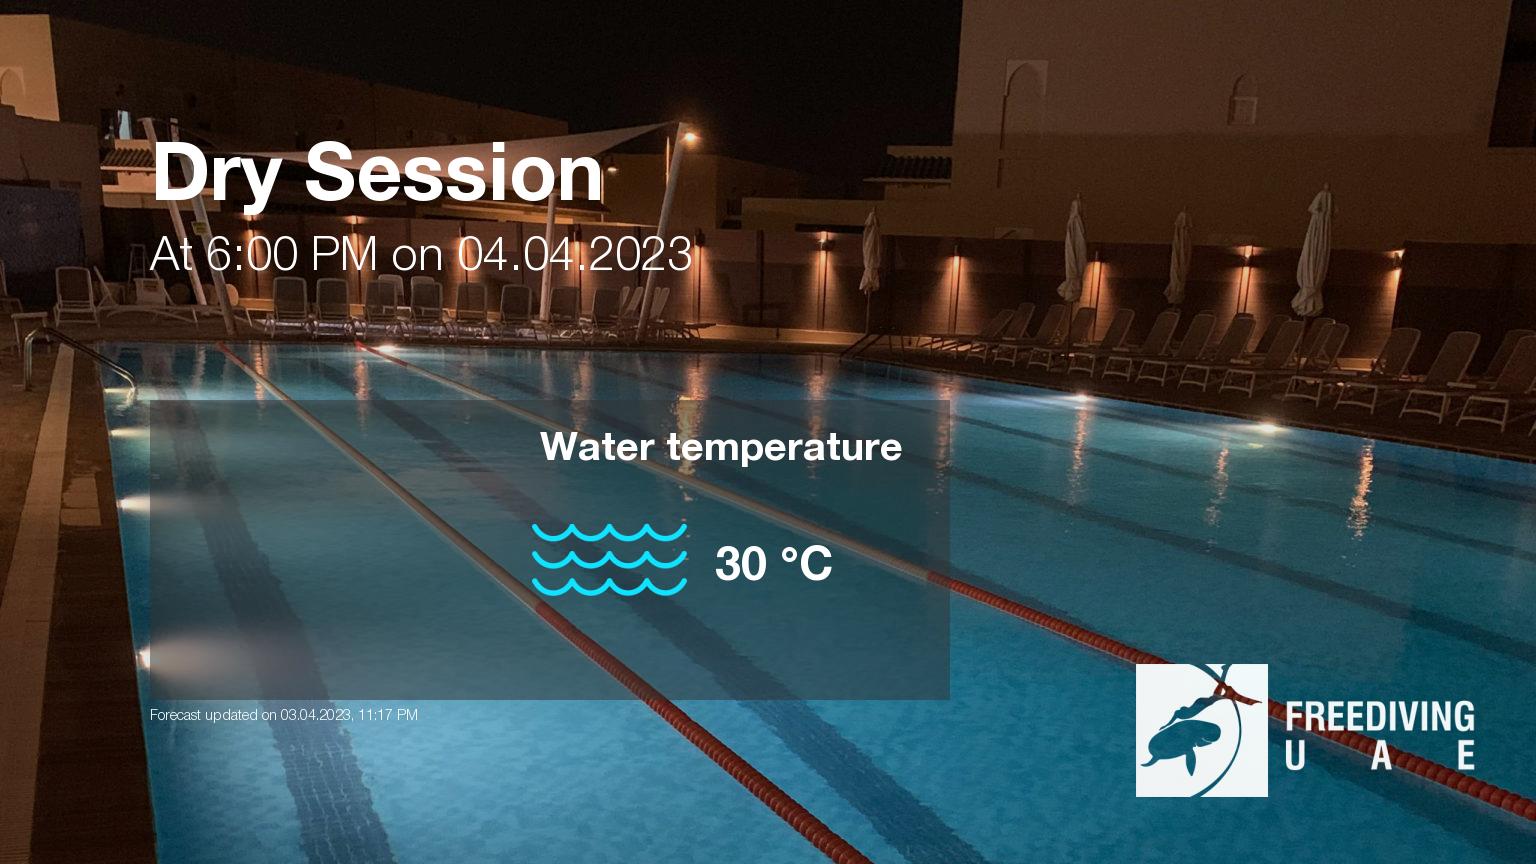 Expected weather during Dry Session on Tue, Apr 4, at 6:00 PM